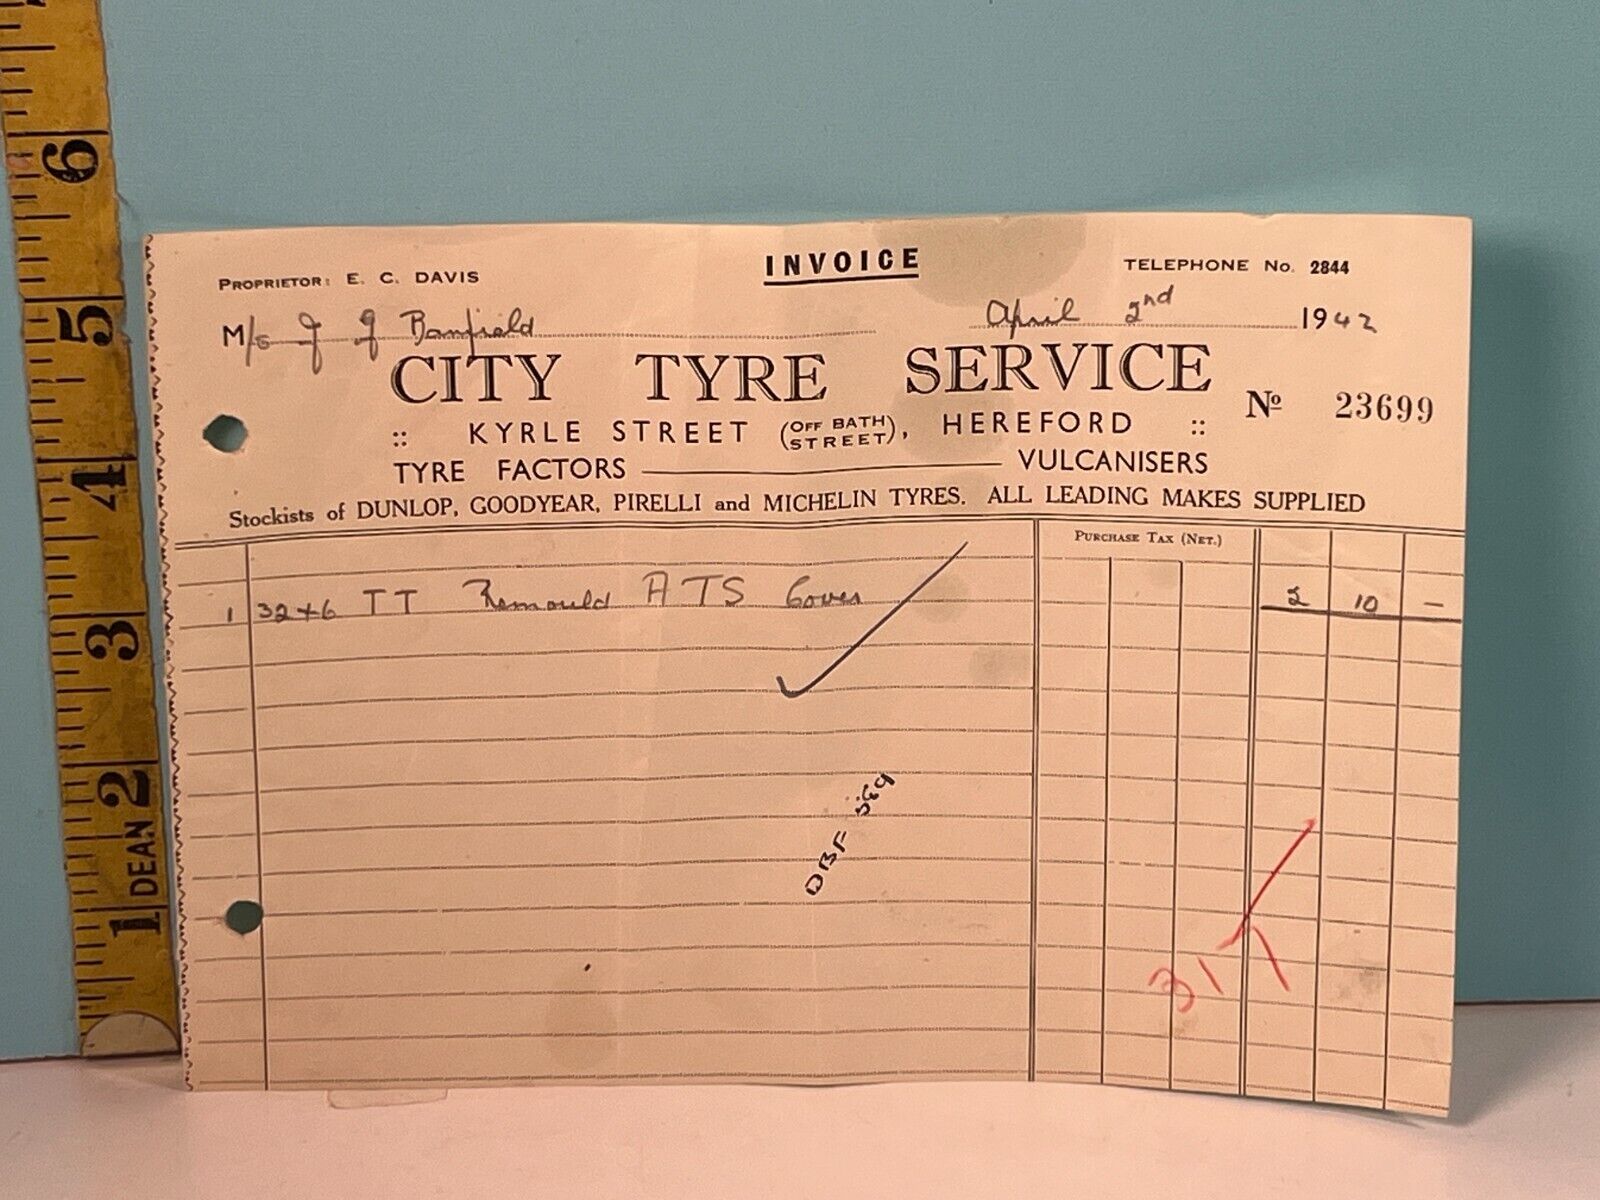 1942 City Tyre Service remount tires Invoice , Herefordshire, England